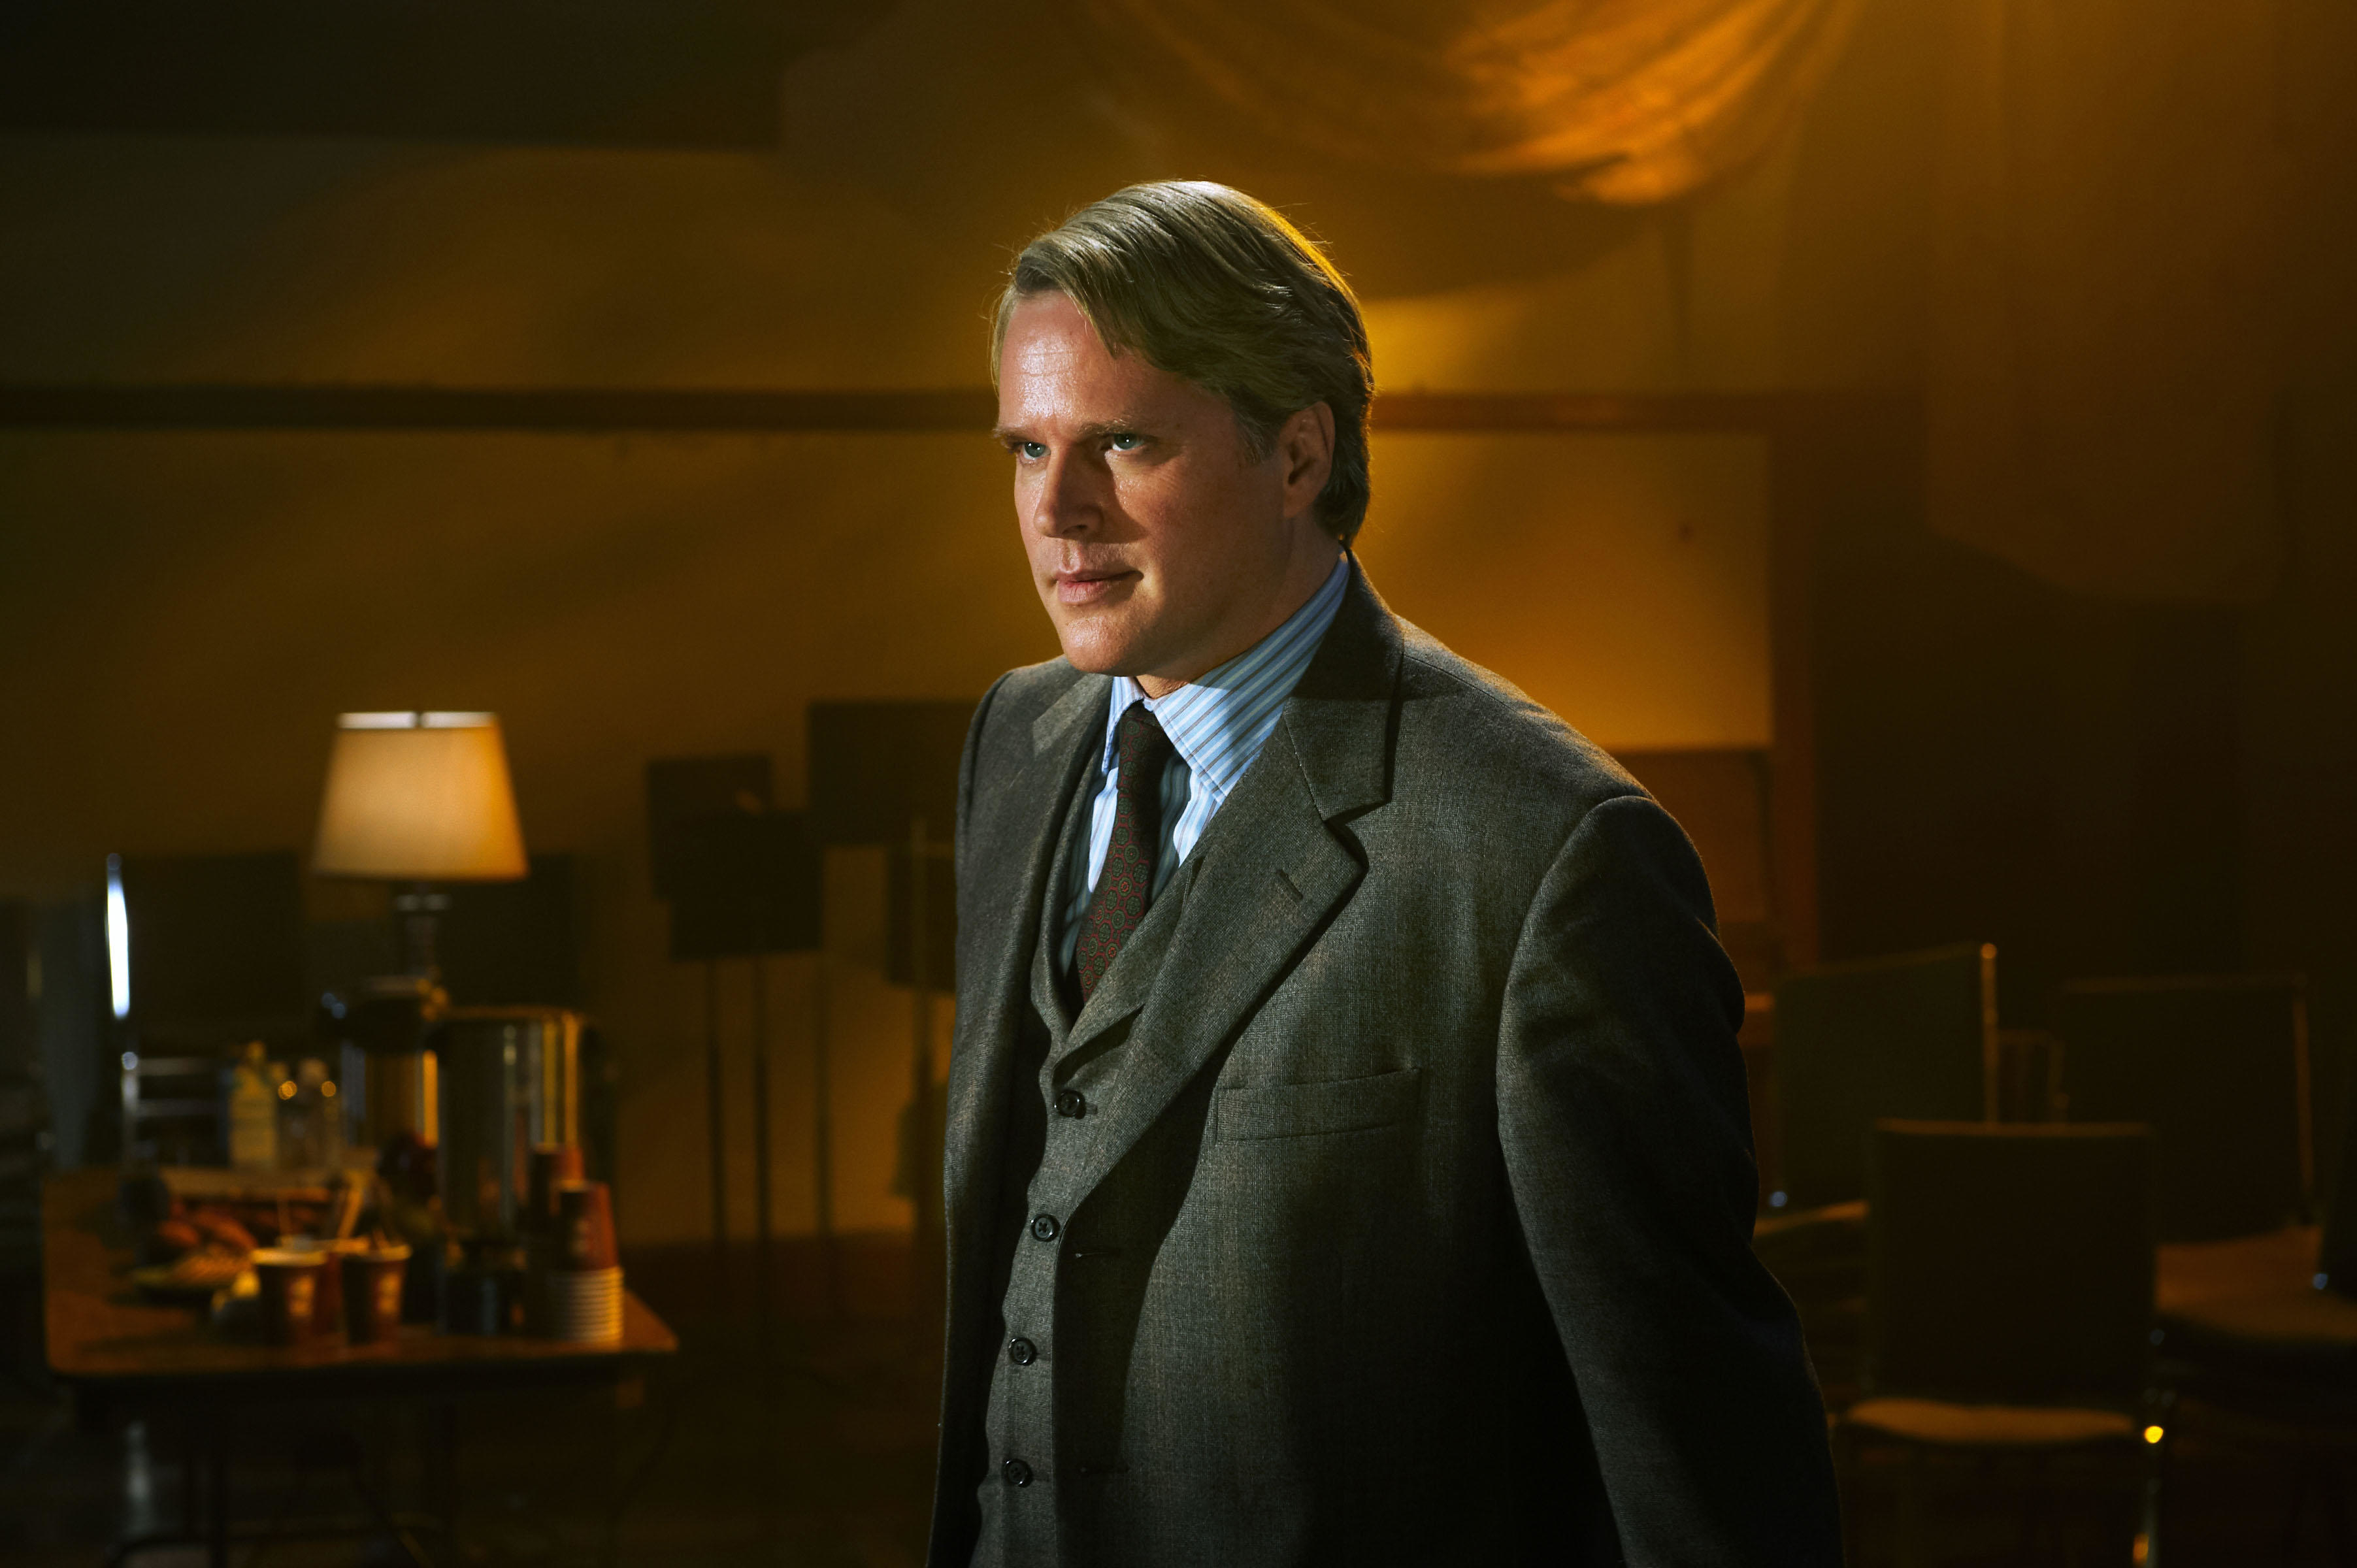 A well-dressed Cary Elwes stands ominously in a dark office